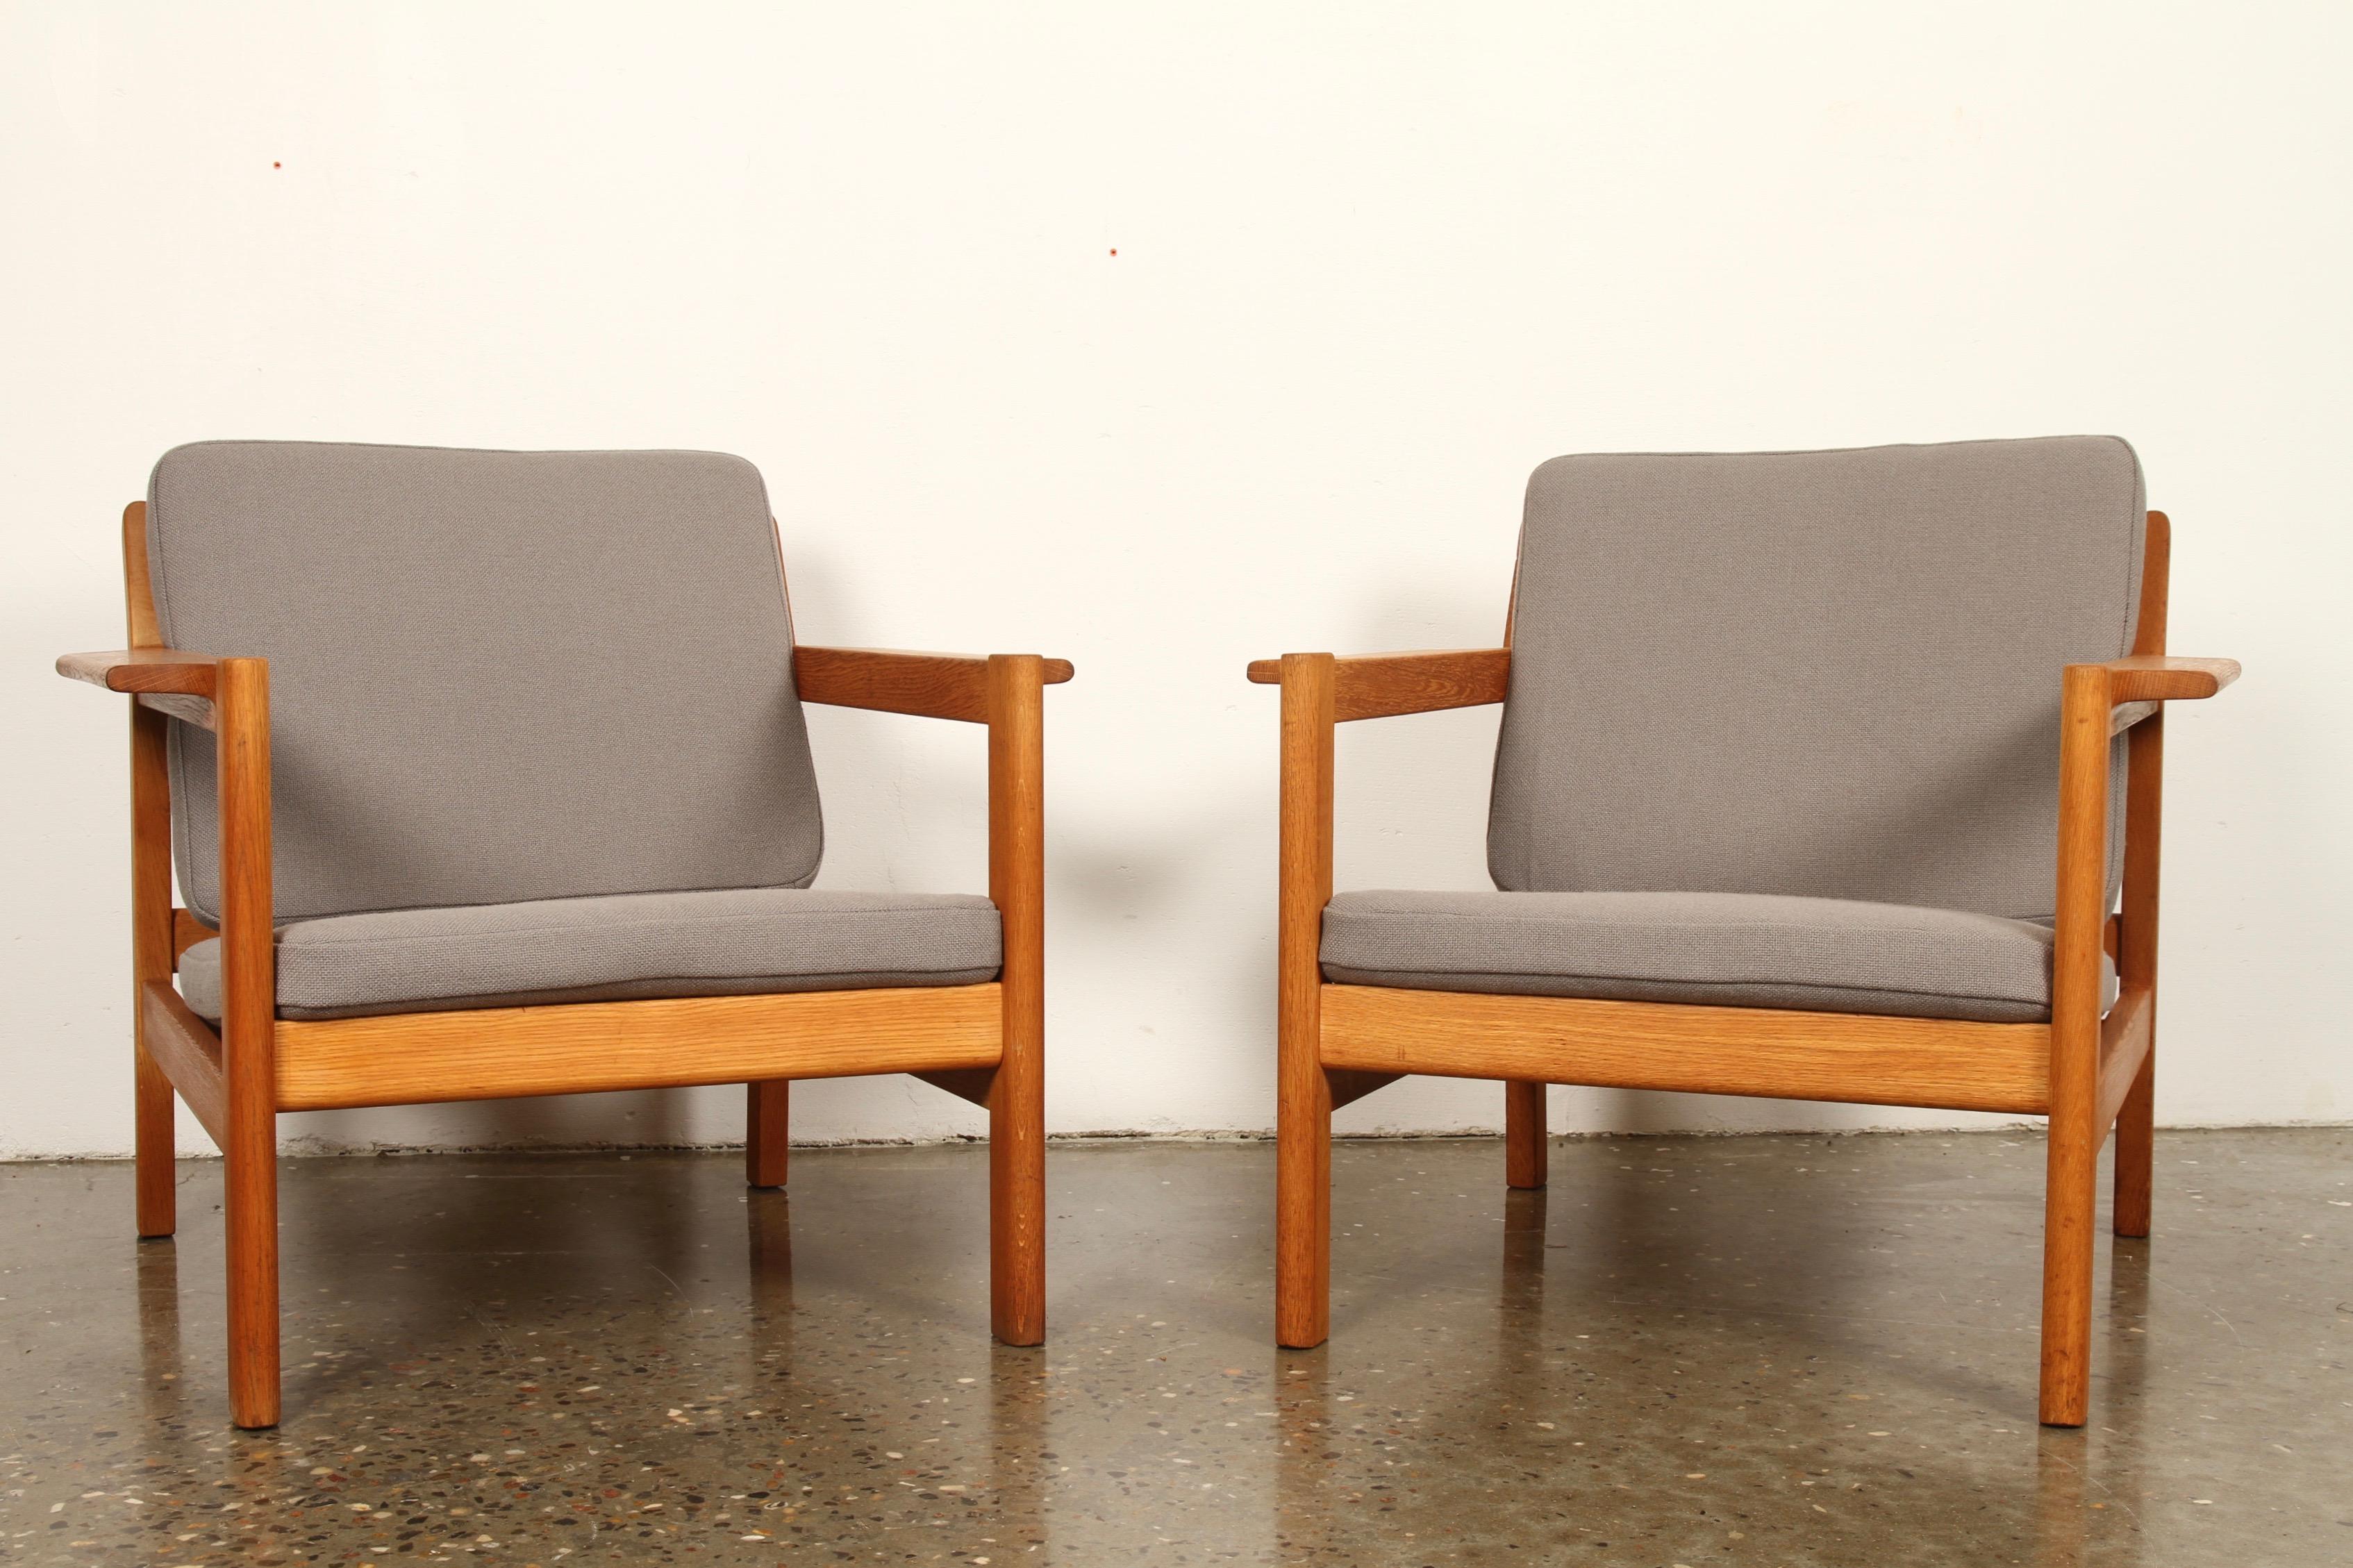 Danish modern lounge chairs by Børge Mogensen for Fredericia Stolefabrik. Restored oiled solid oak frame. Brand new custom made cushions in Hallingdal Wool and new seat straps. Good quality danish vintage armchairs.